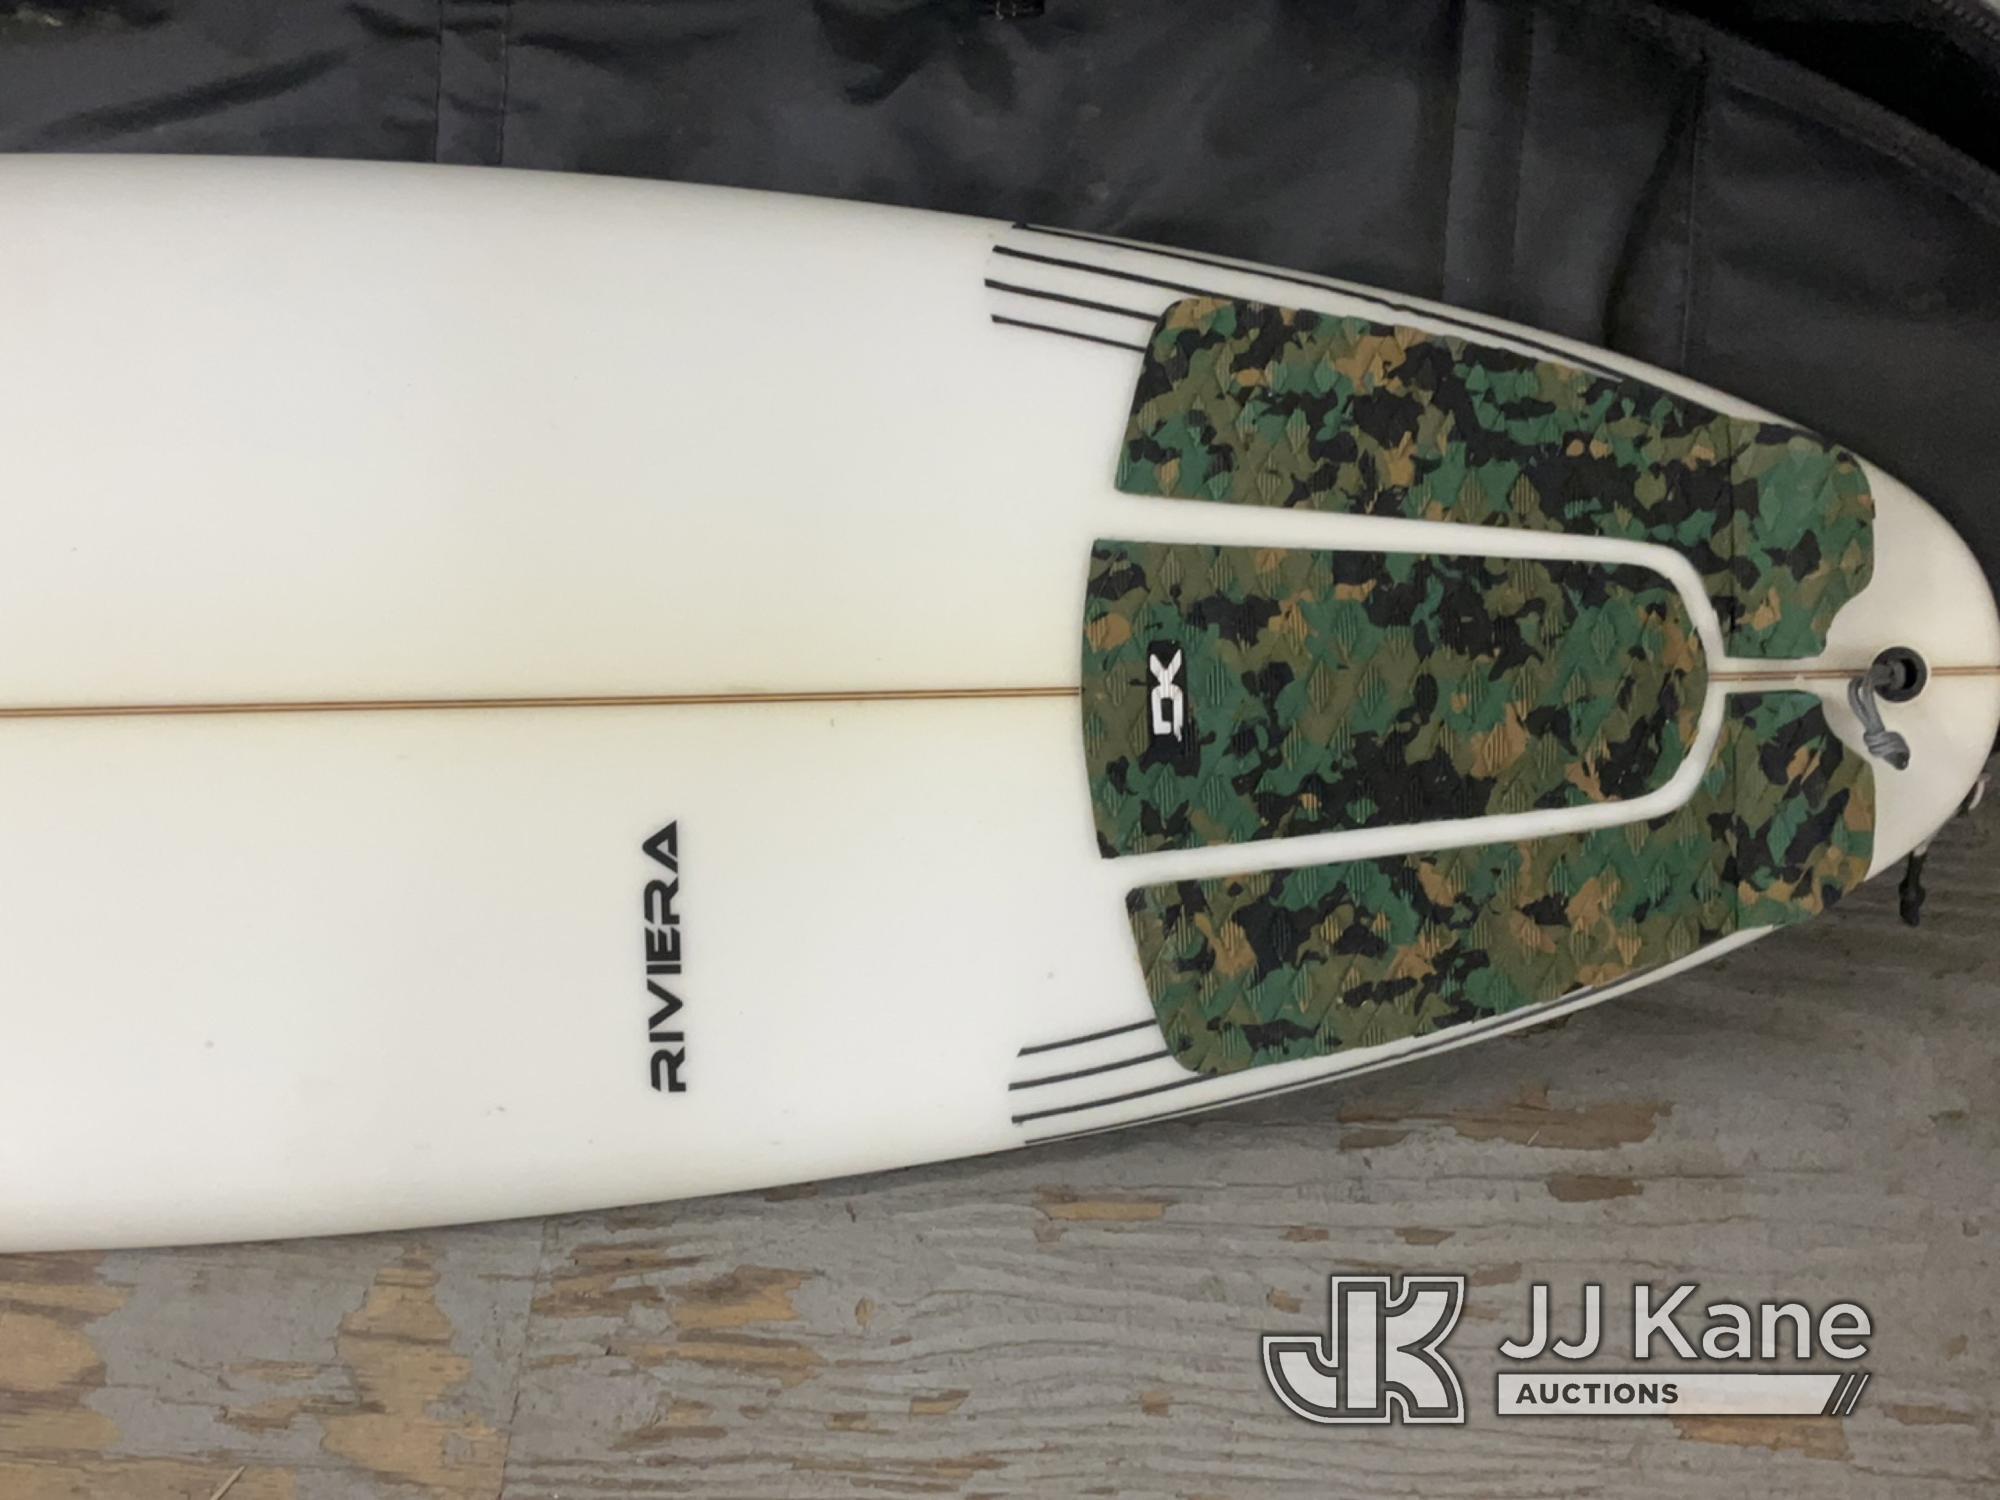 (Jurupa Valley, CA) Surfboard (Used) NOTE: This unit is being sold AS IS/WHERE IS via Timed Auction